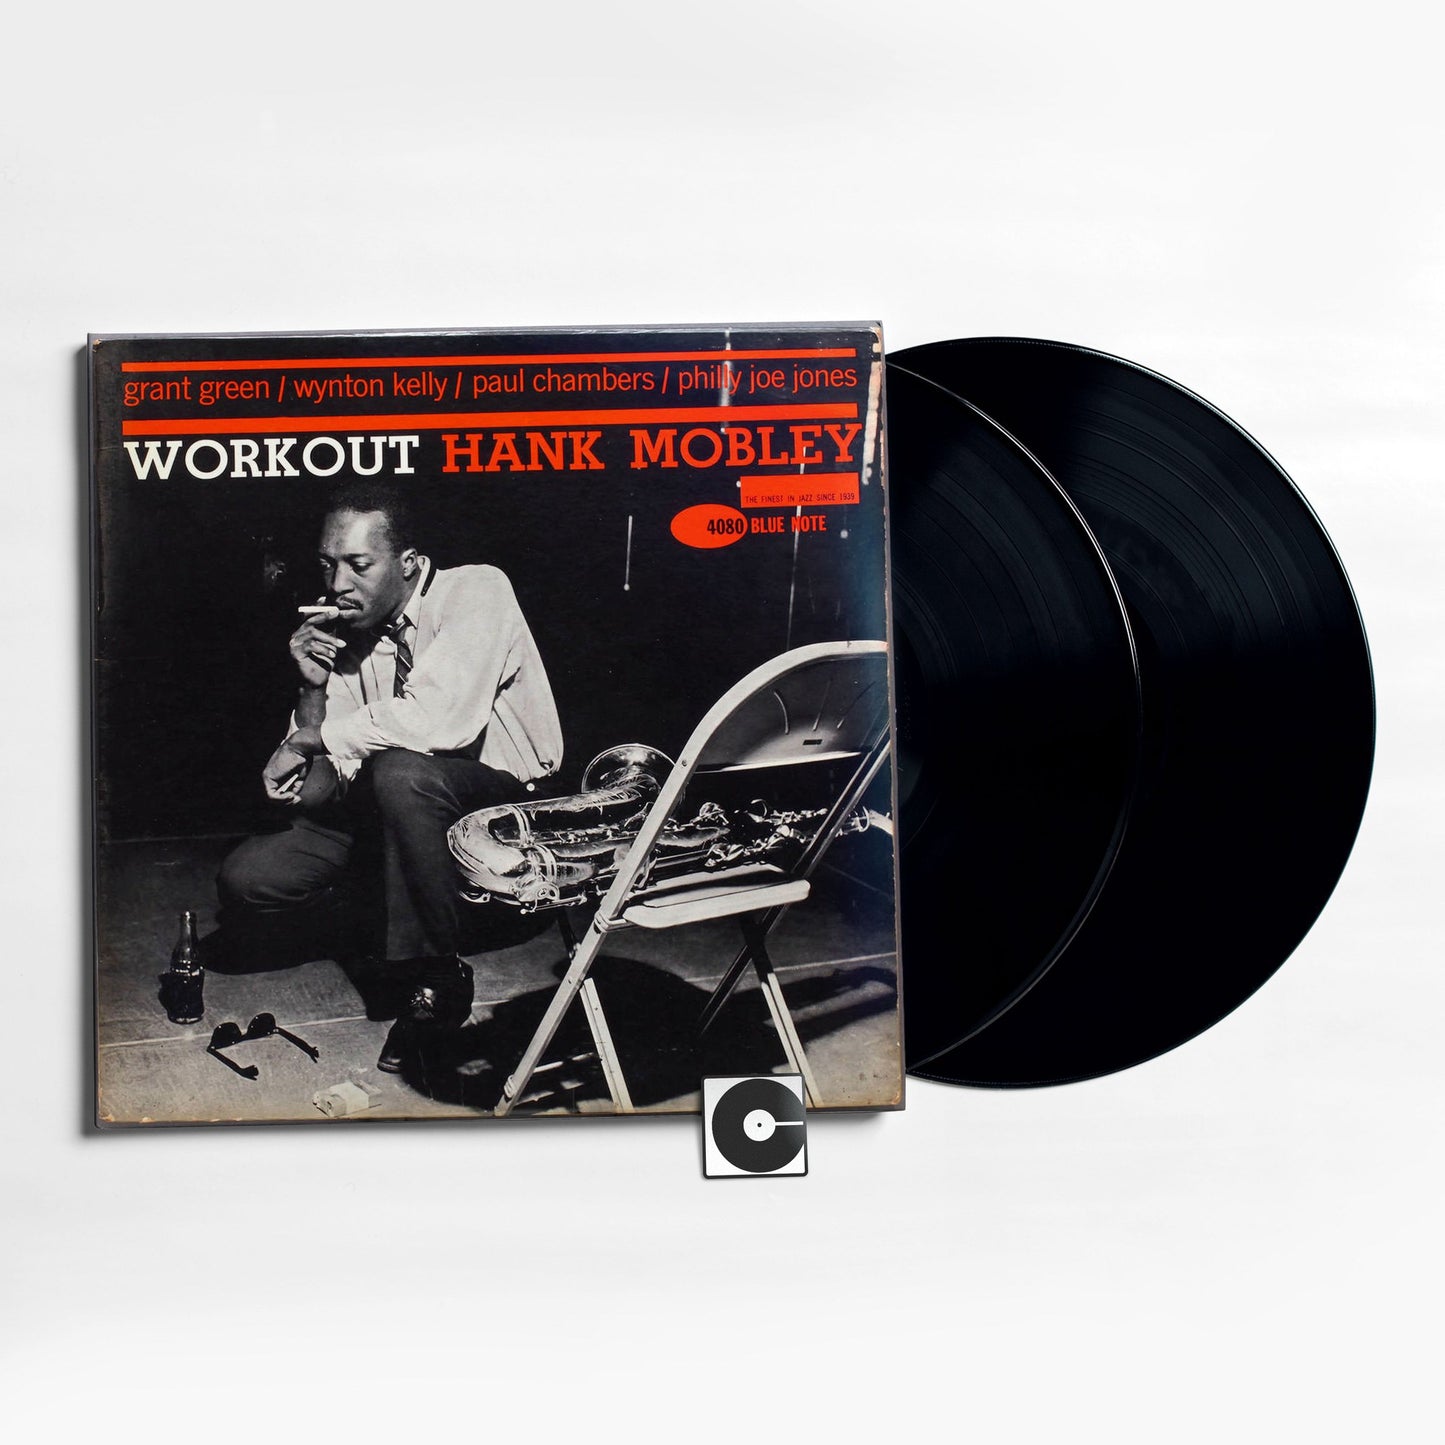 Hank Mobley - "Workout" Analogue Productions